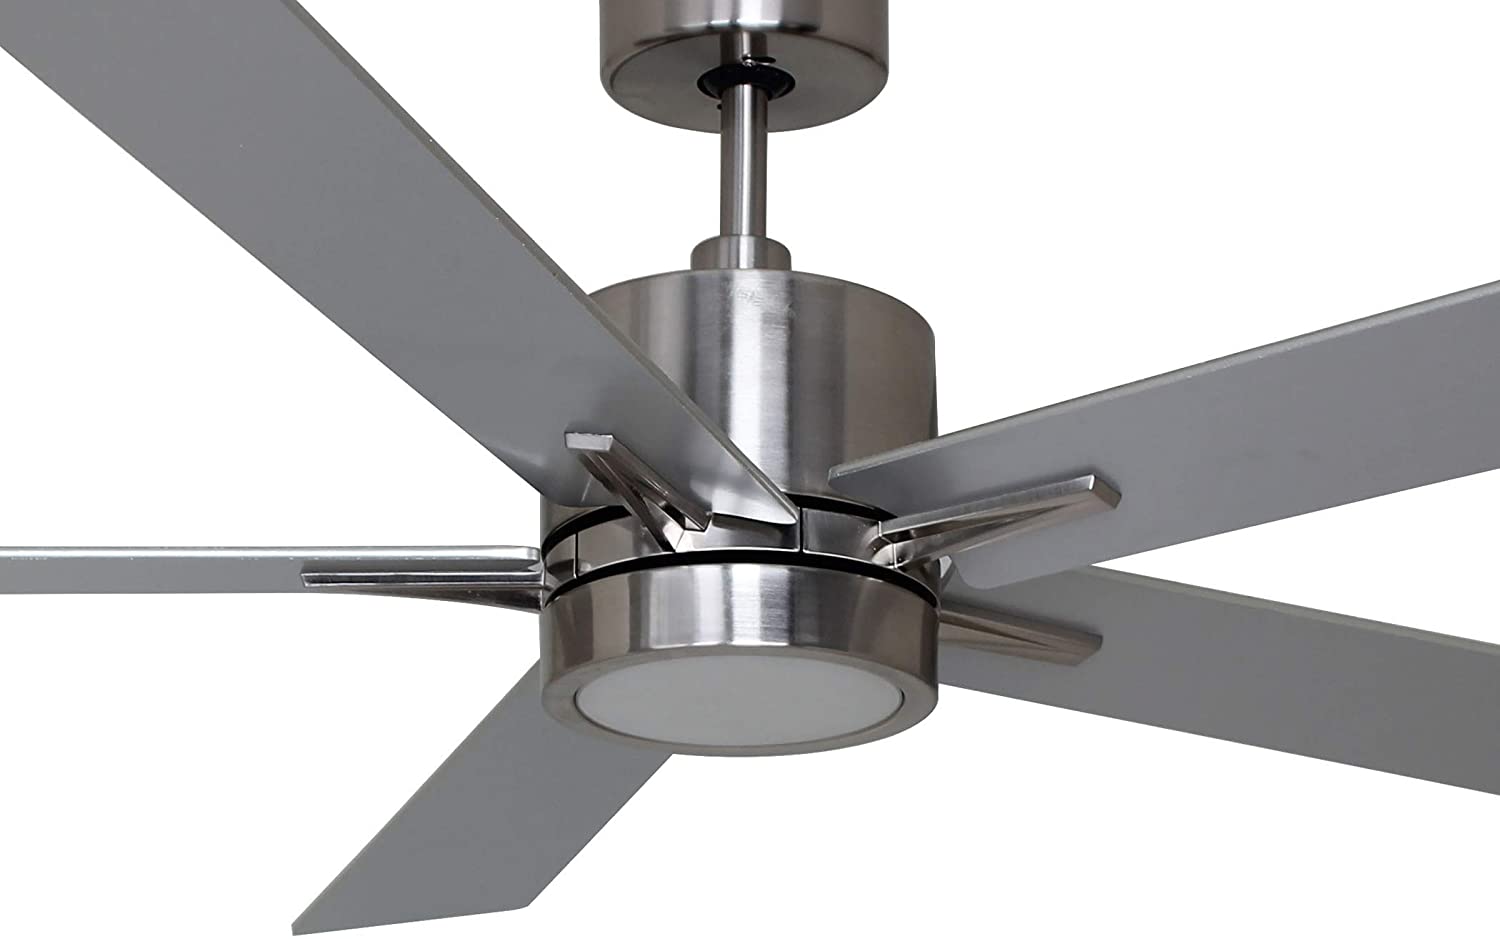 5 blade 52" Nickel Celing Fan With Lights and Wall Control